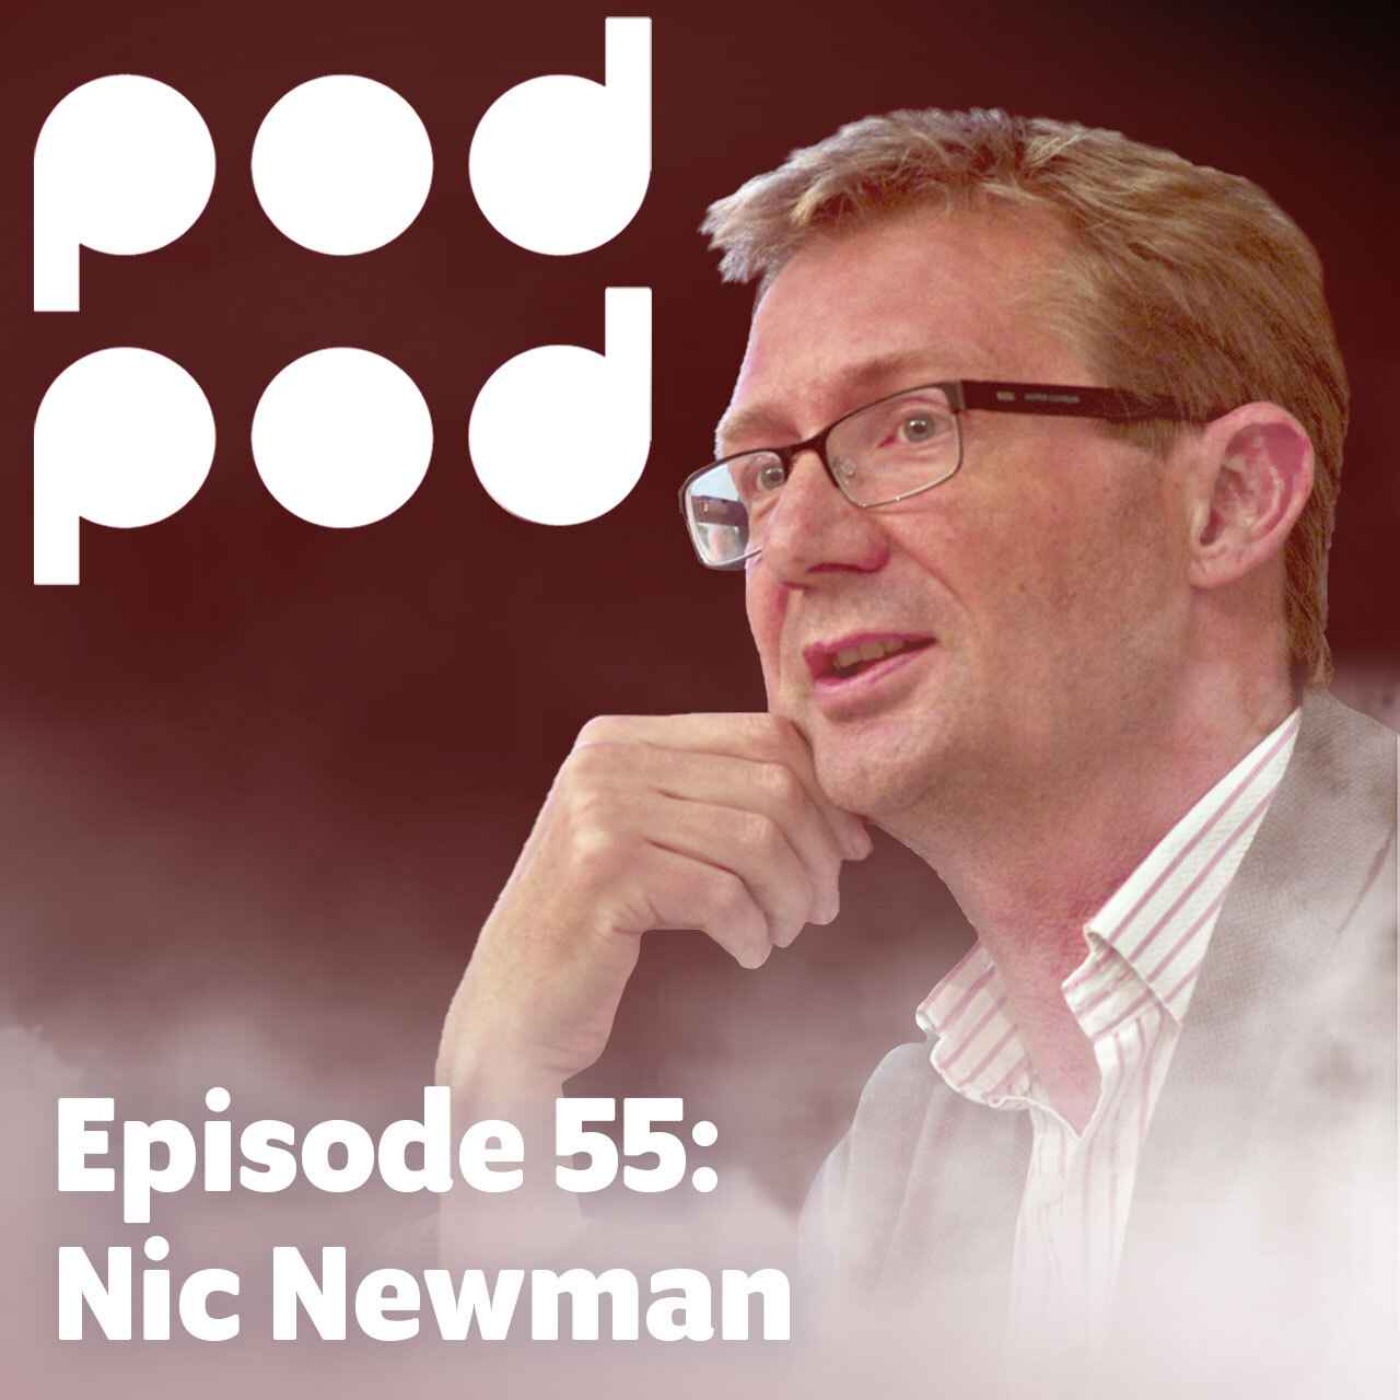 Nic Newman: Why news podcasts are on the rise